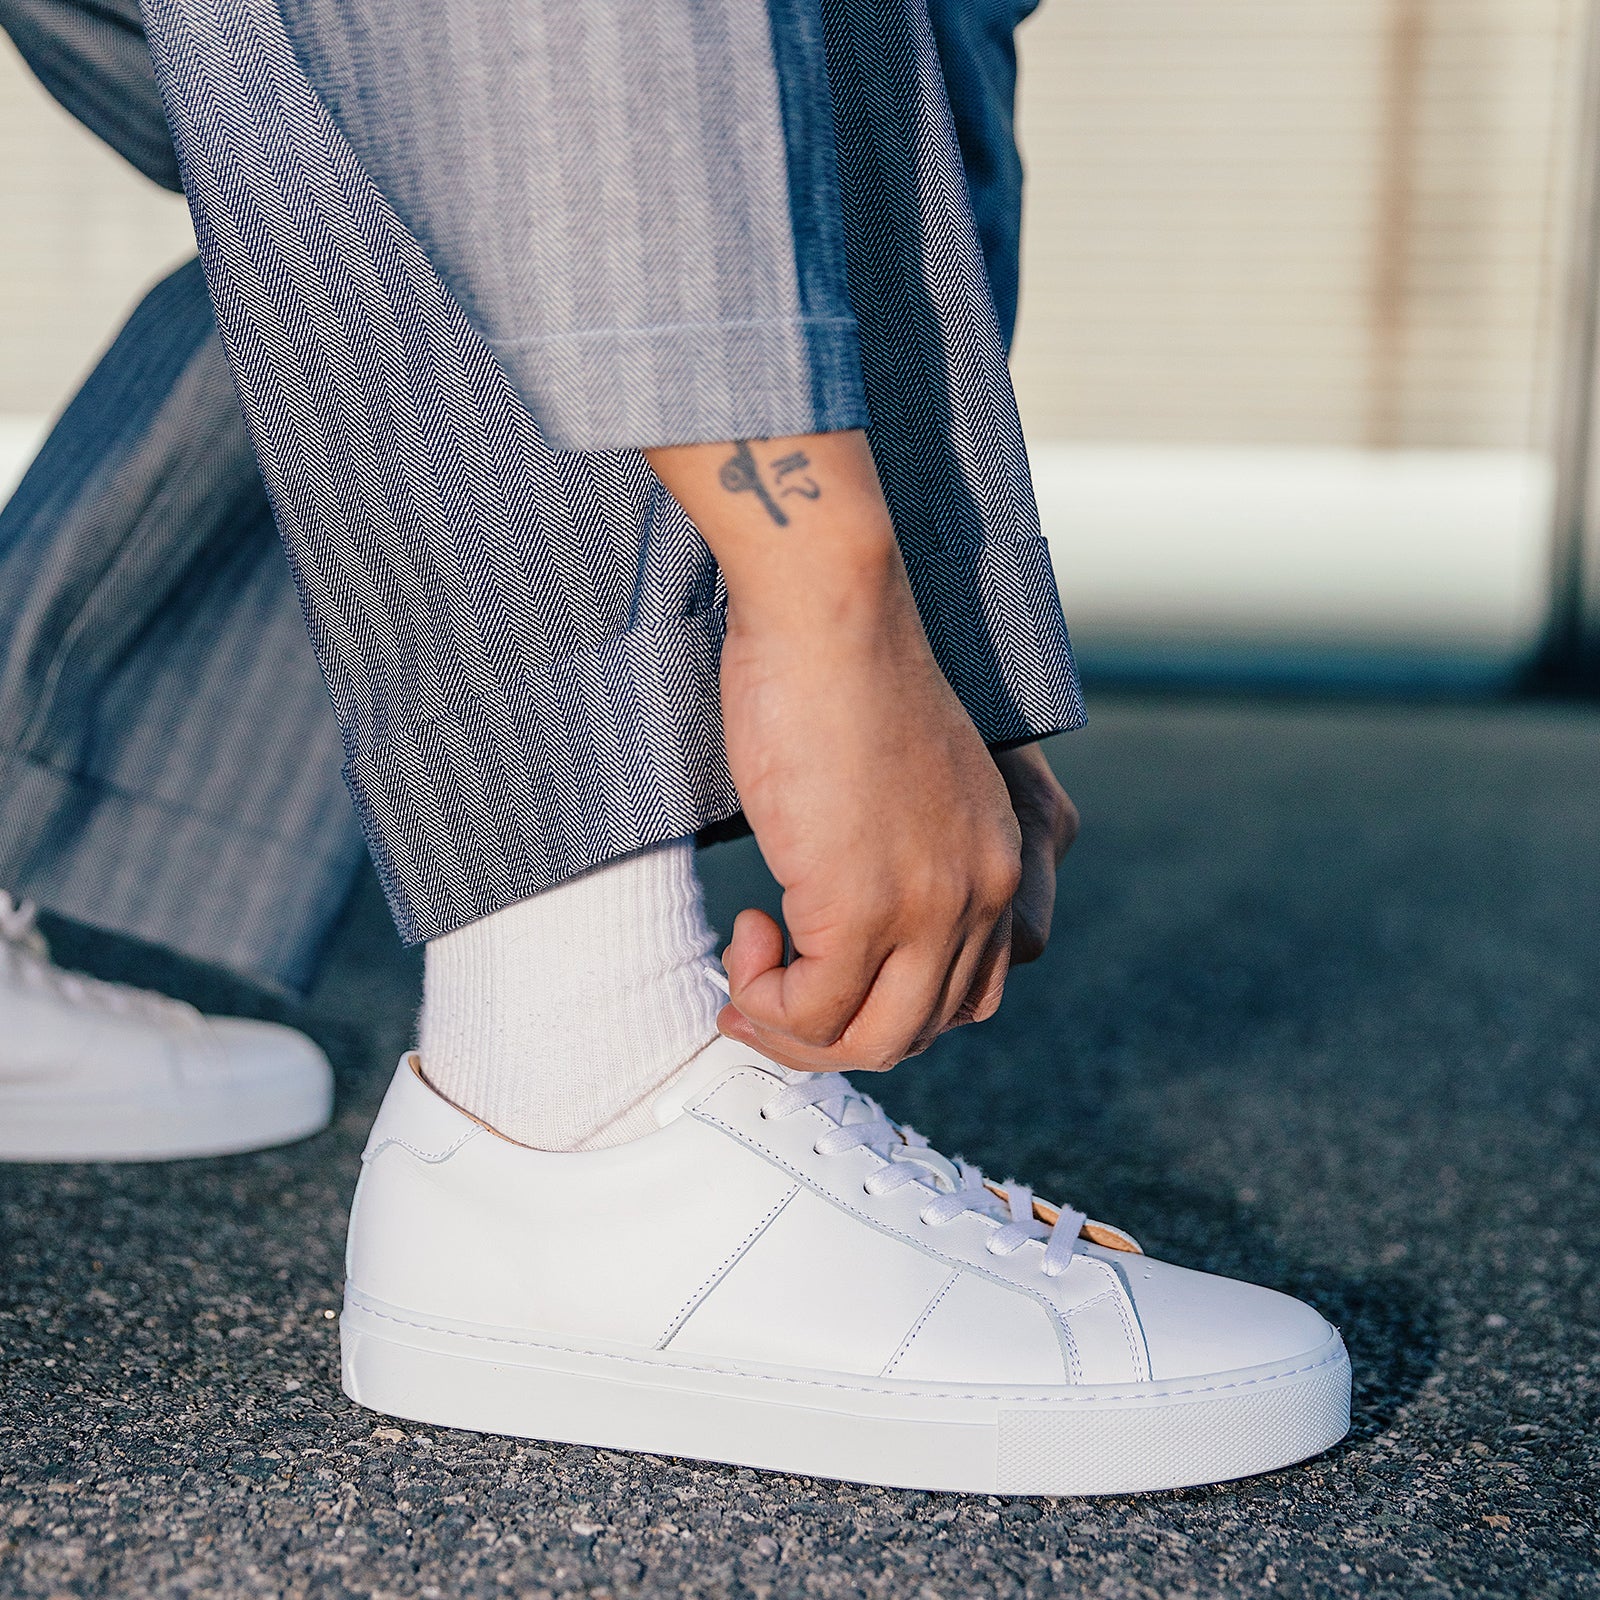 Nothing New Men's Kicks Sustainable Canvas Low-top Sneaker | Off-White Gum, Size 9.5